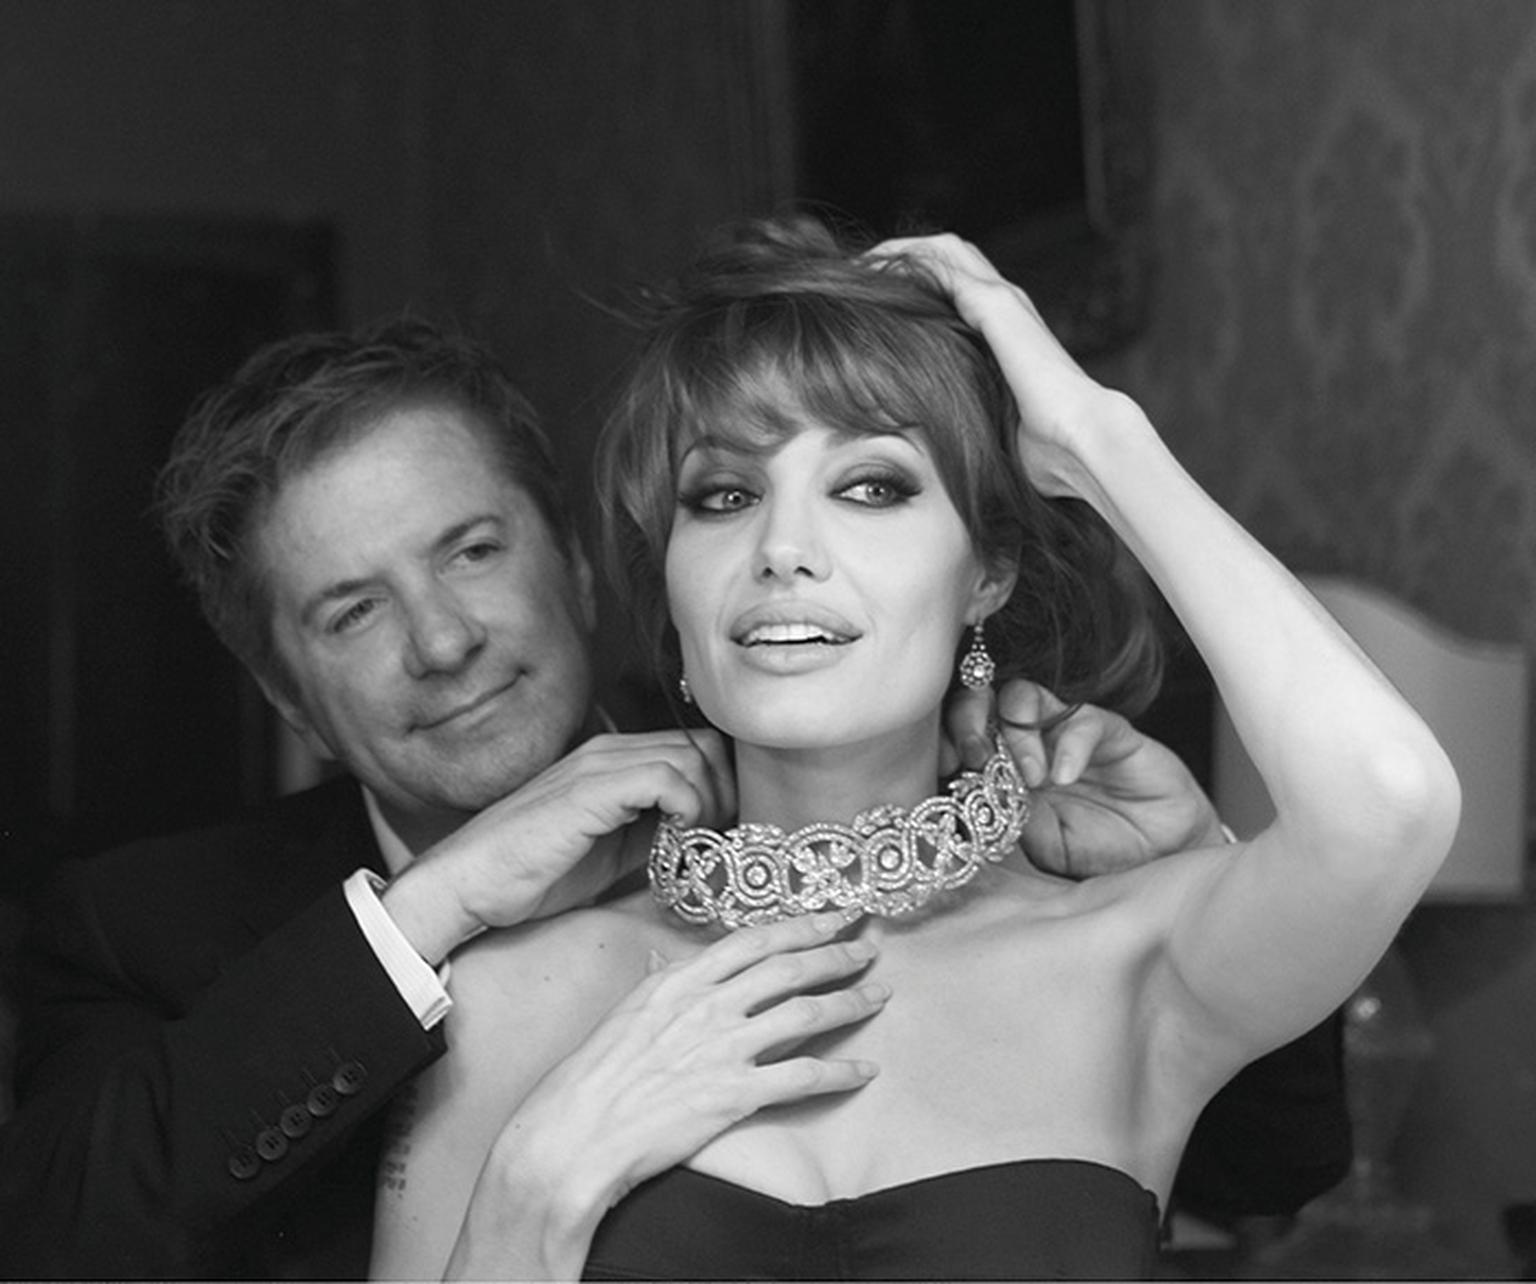 Photographer-Patrick-Demarchelier-captures-Angelina-Jolie-and-Robert-Procop-on-the-set-of-The-Tourist.-Photo-credit-Patrick-Demarchelier